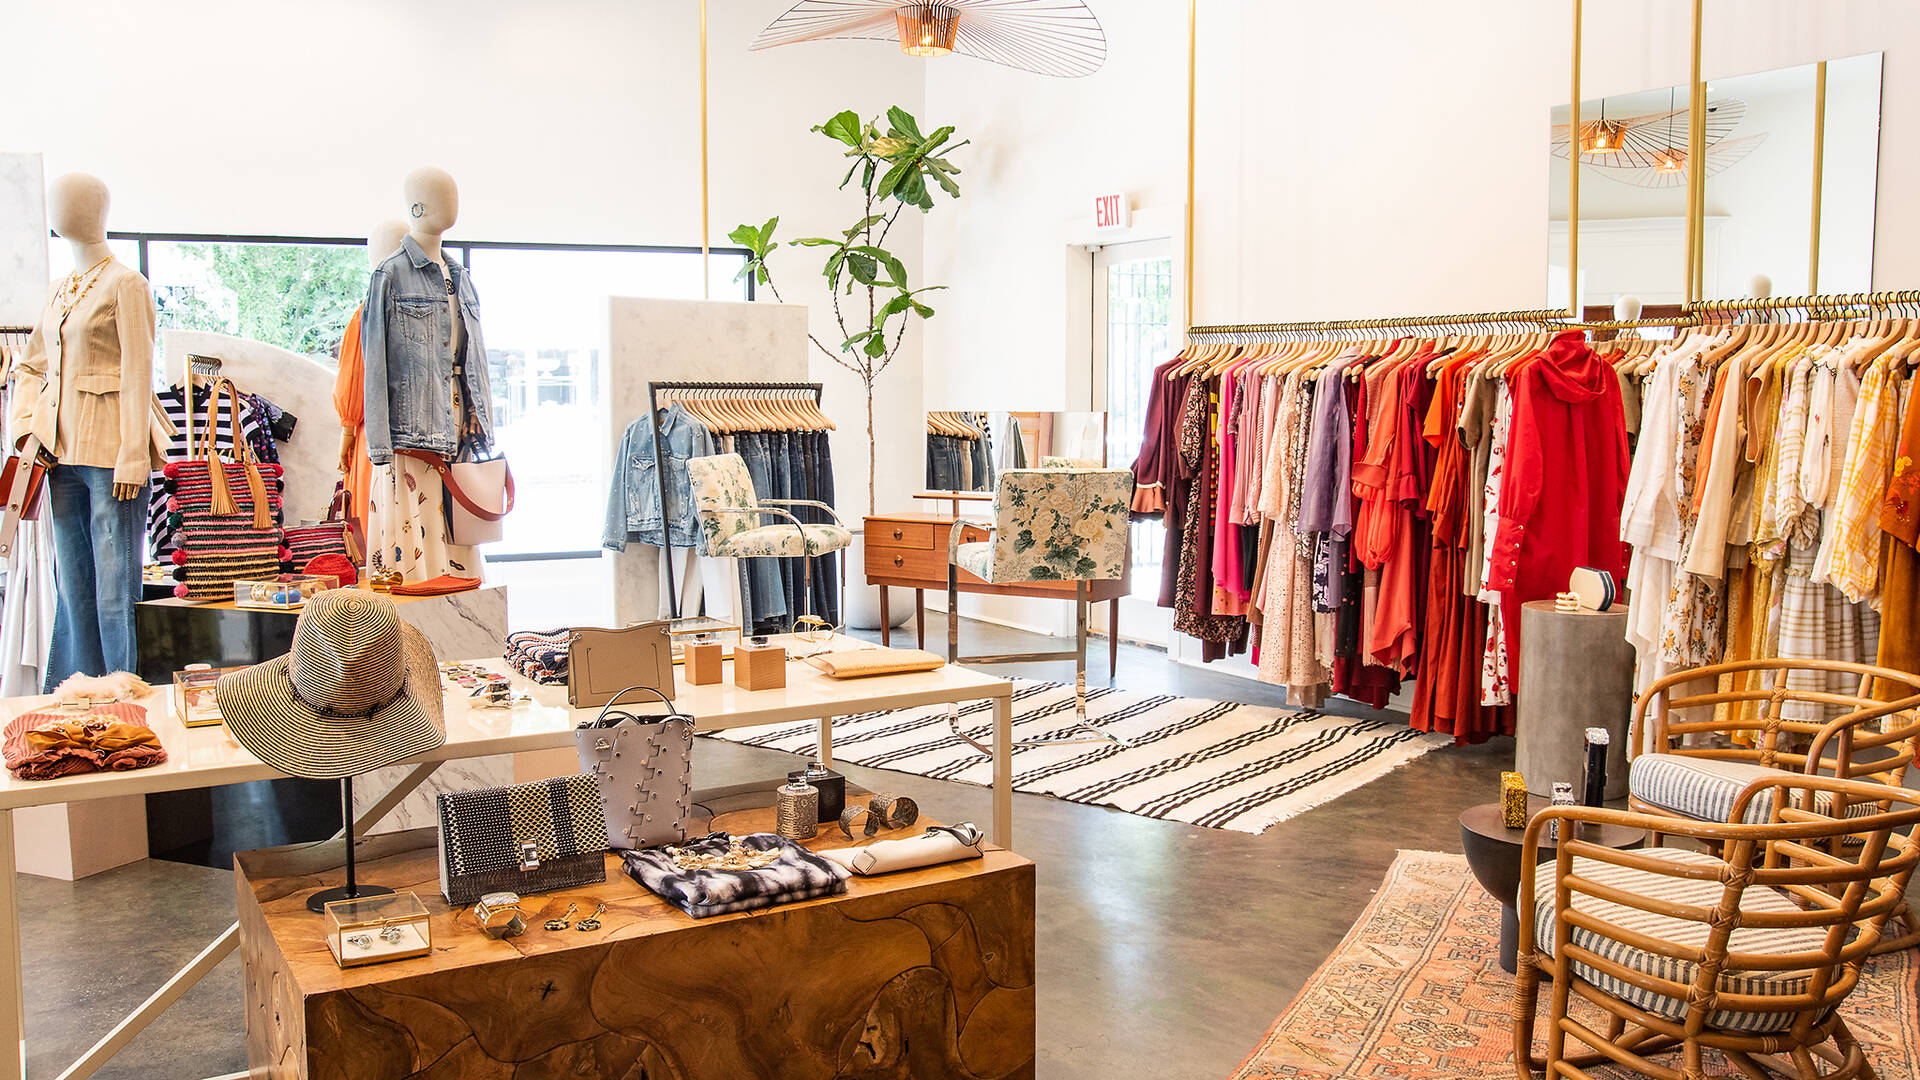 5 Great Areas to go Shopping in New Orleans